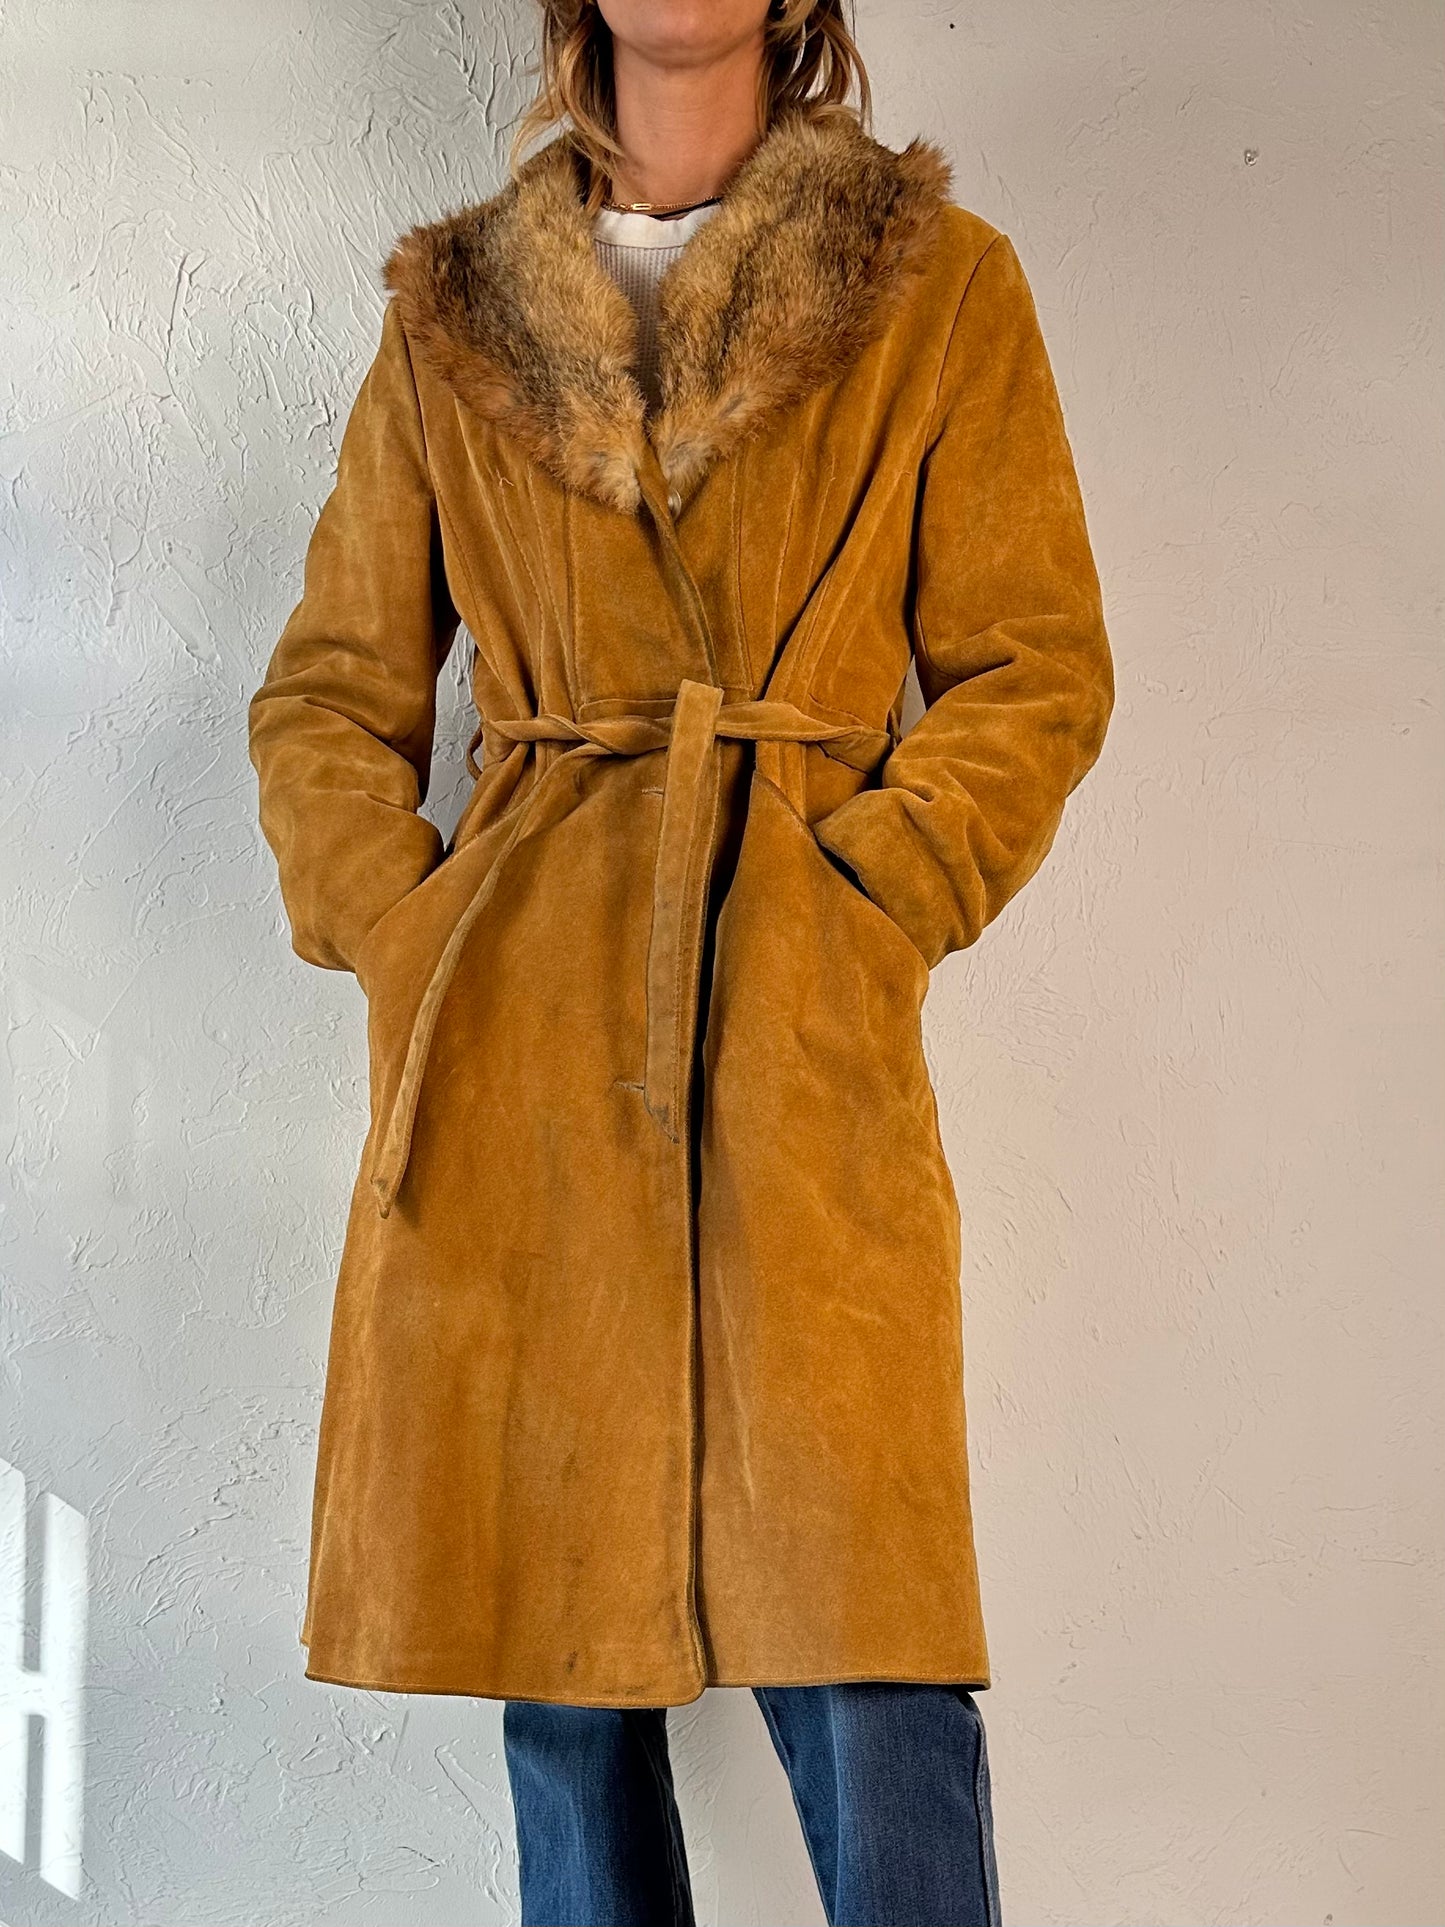 70s 'Fairweather' Suede Leather Penny Lane Coat / Small